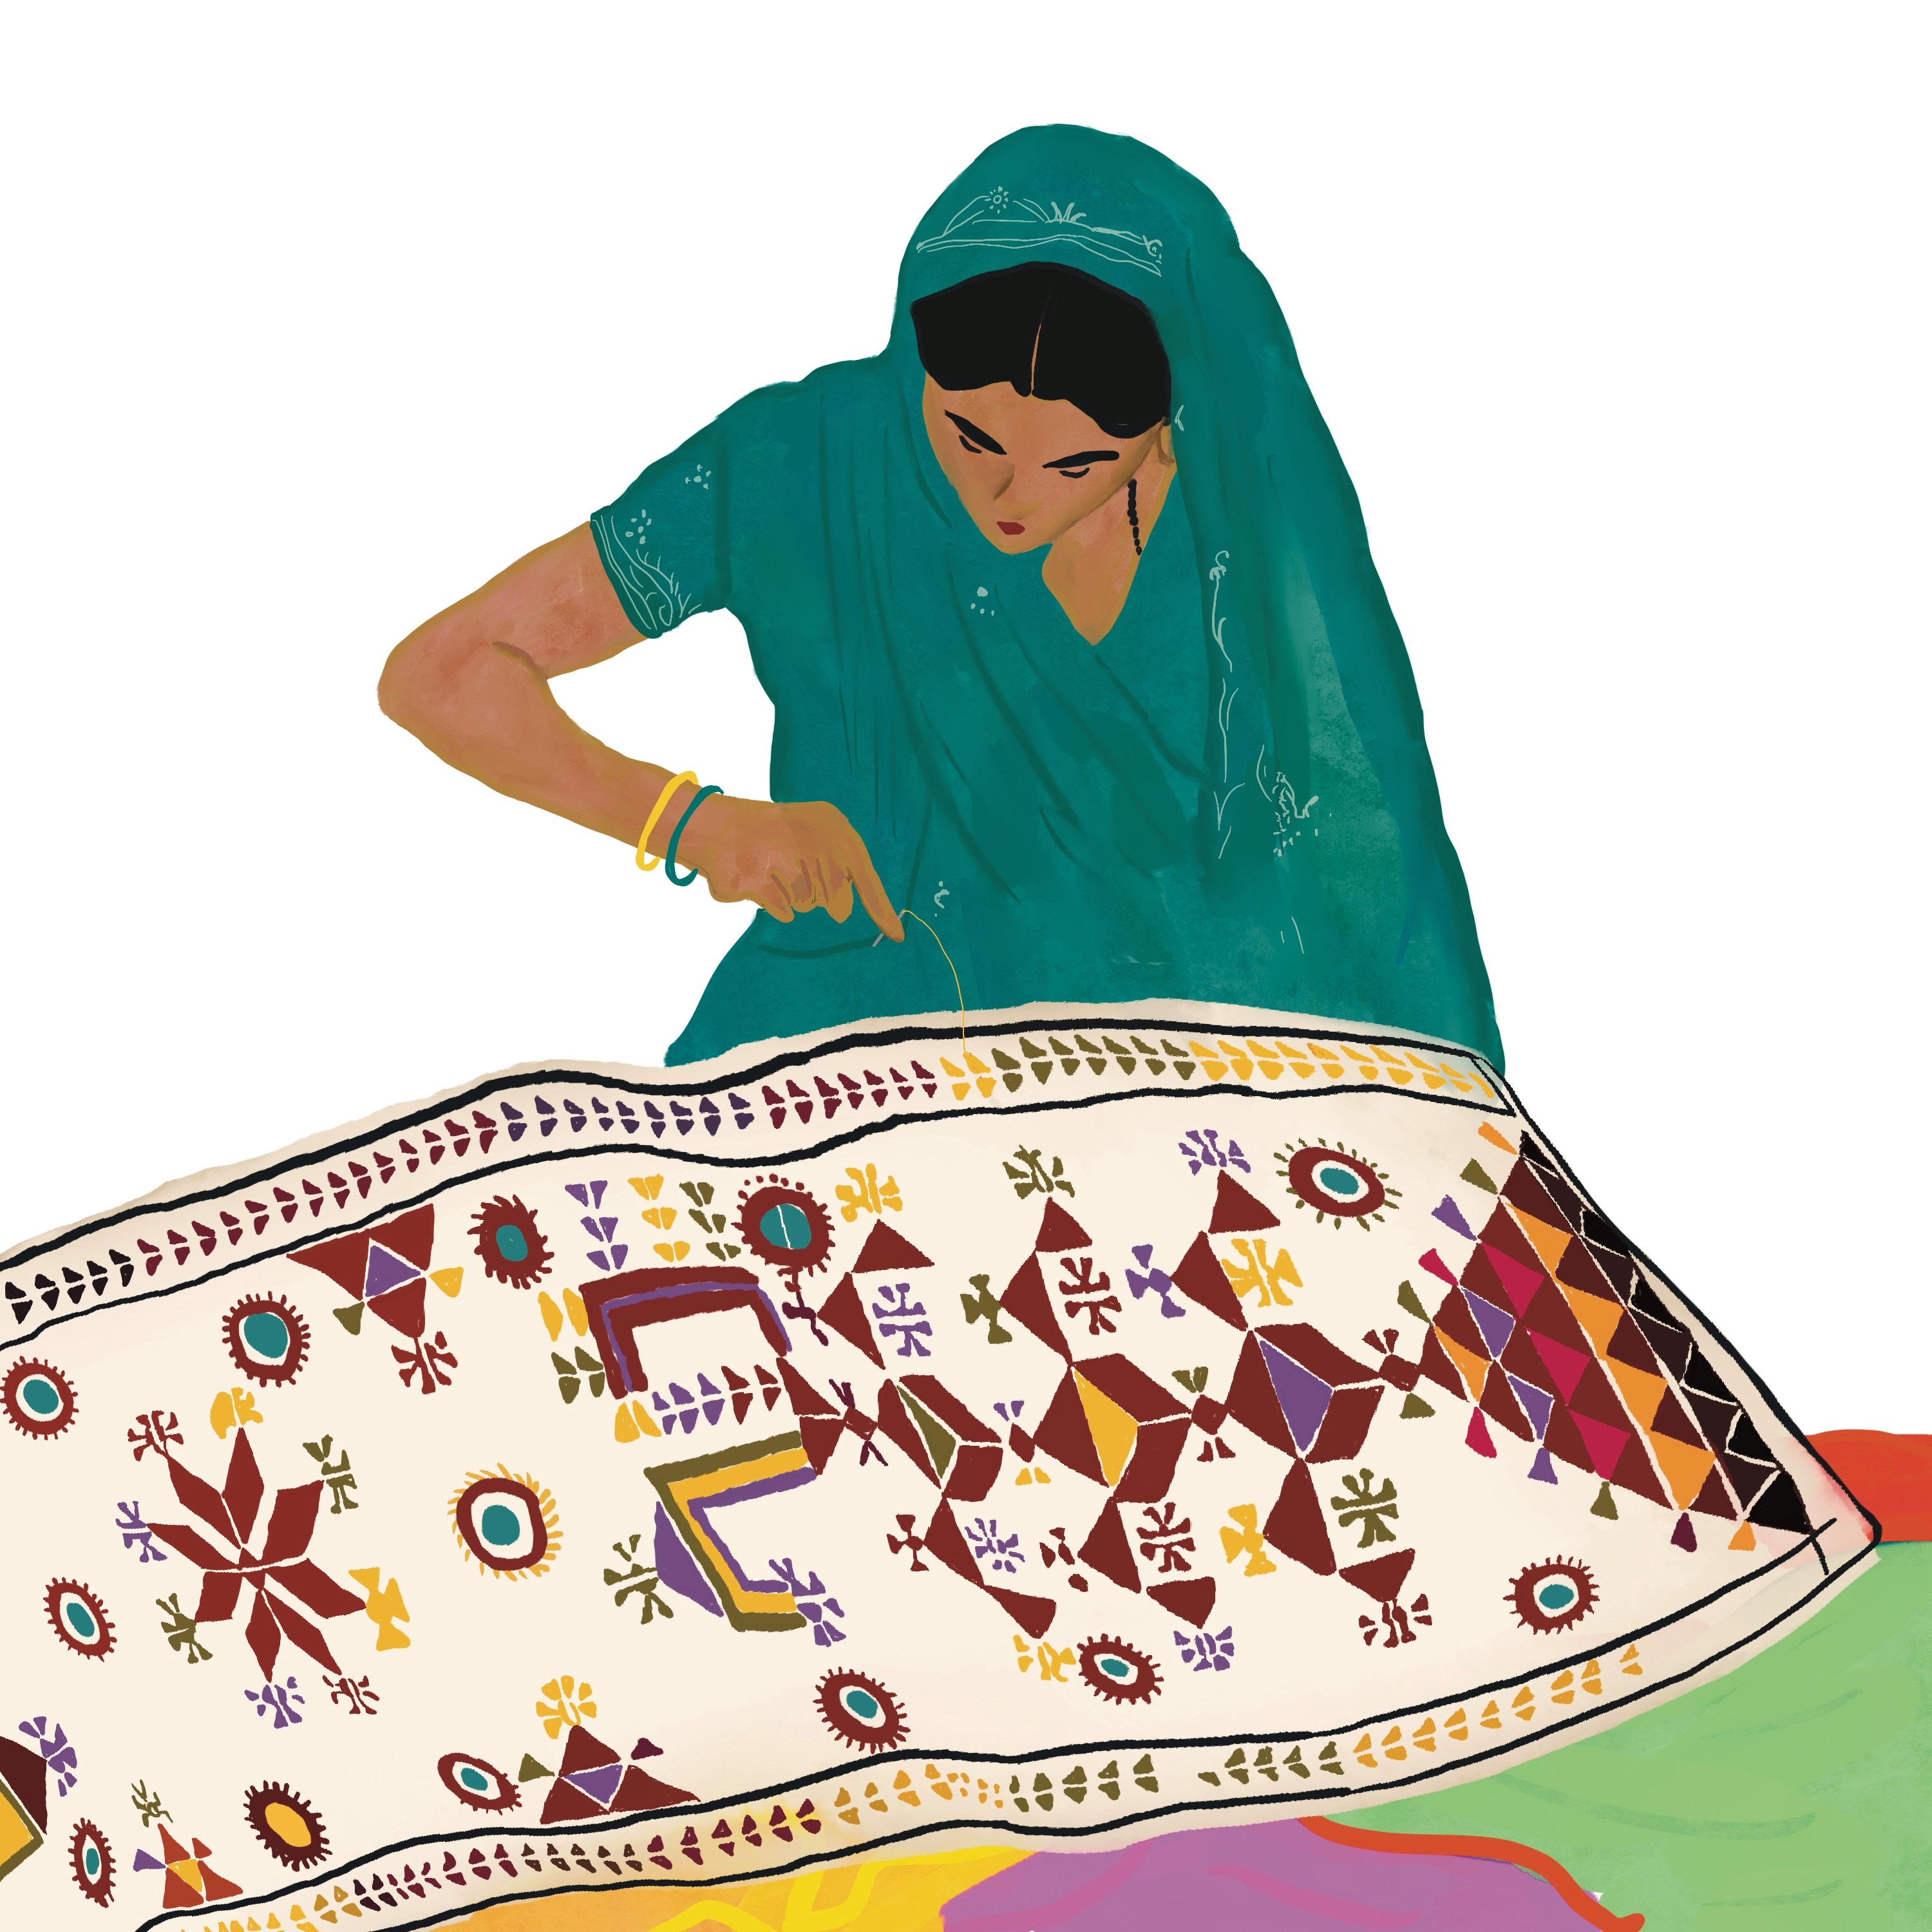 Person stitches scarf containing geometric patterns in red, yellow and purple onto white cloth. Illustration by Malini Chakrabarty.